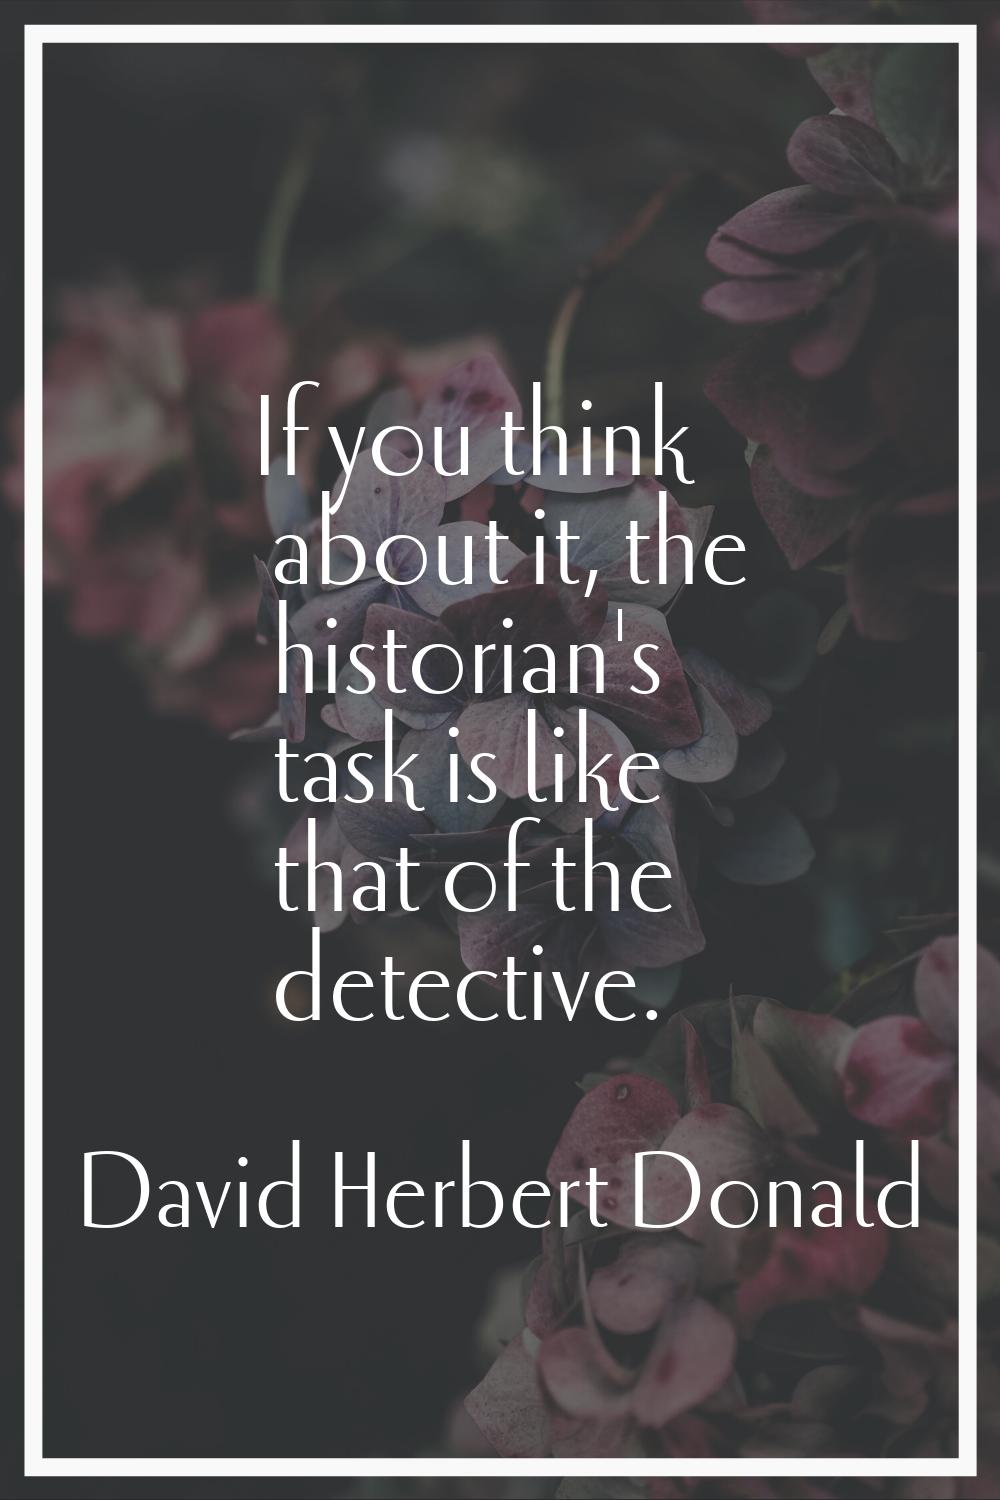 If you think about it, the historian's task is like that of the detective.